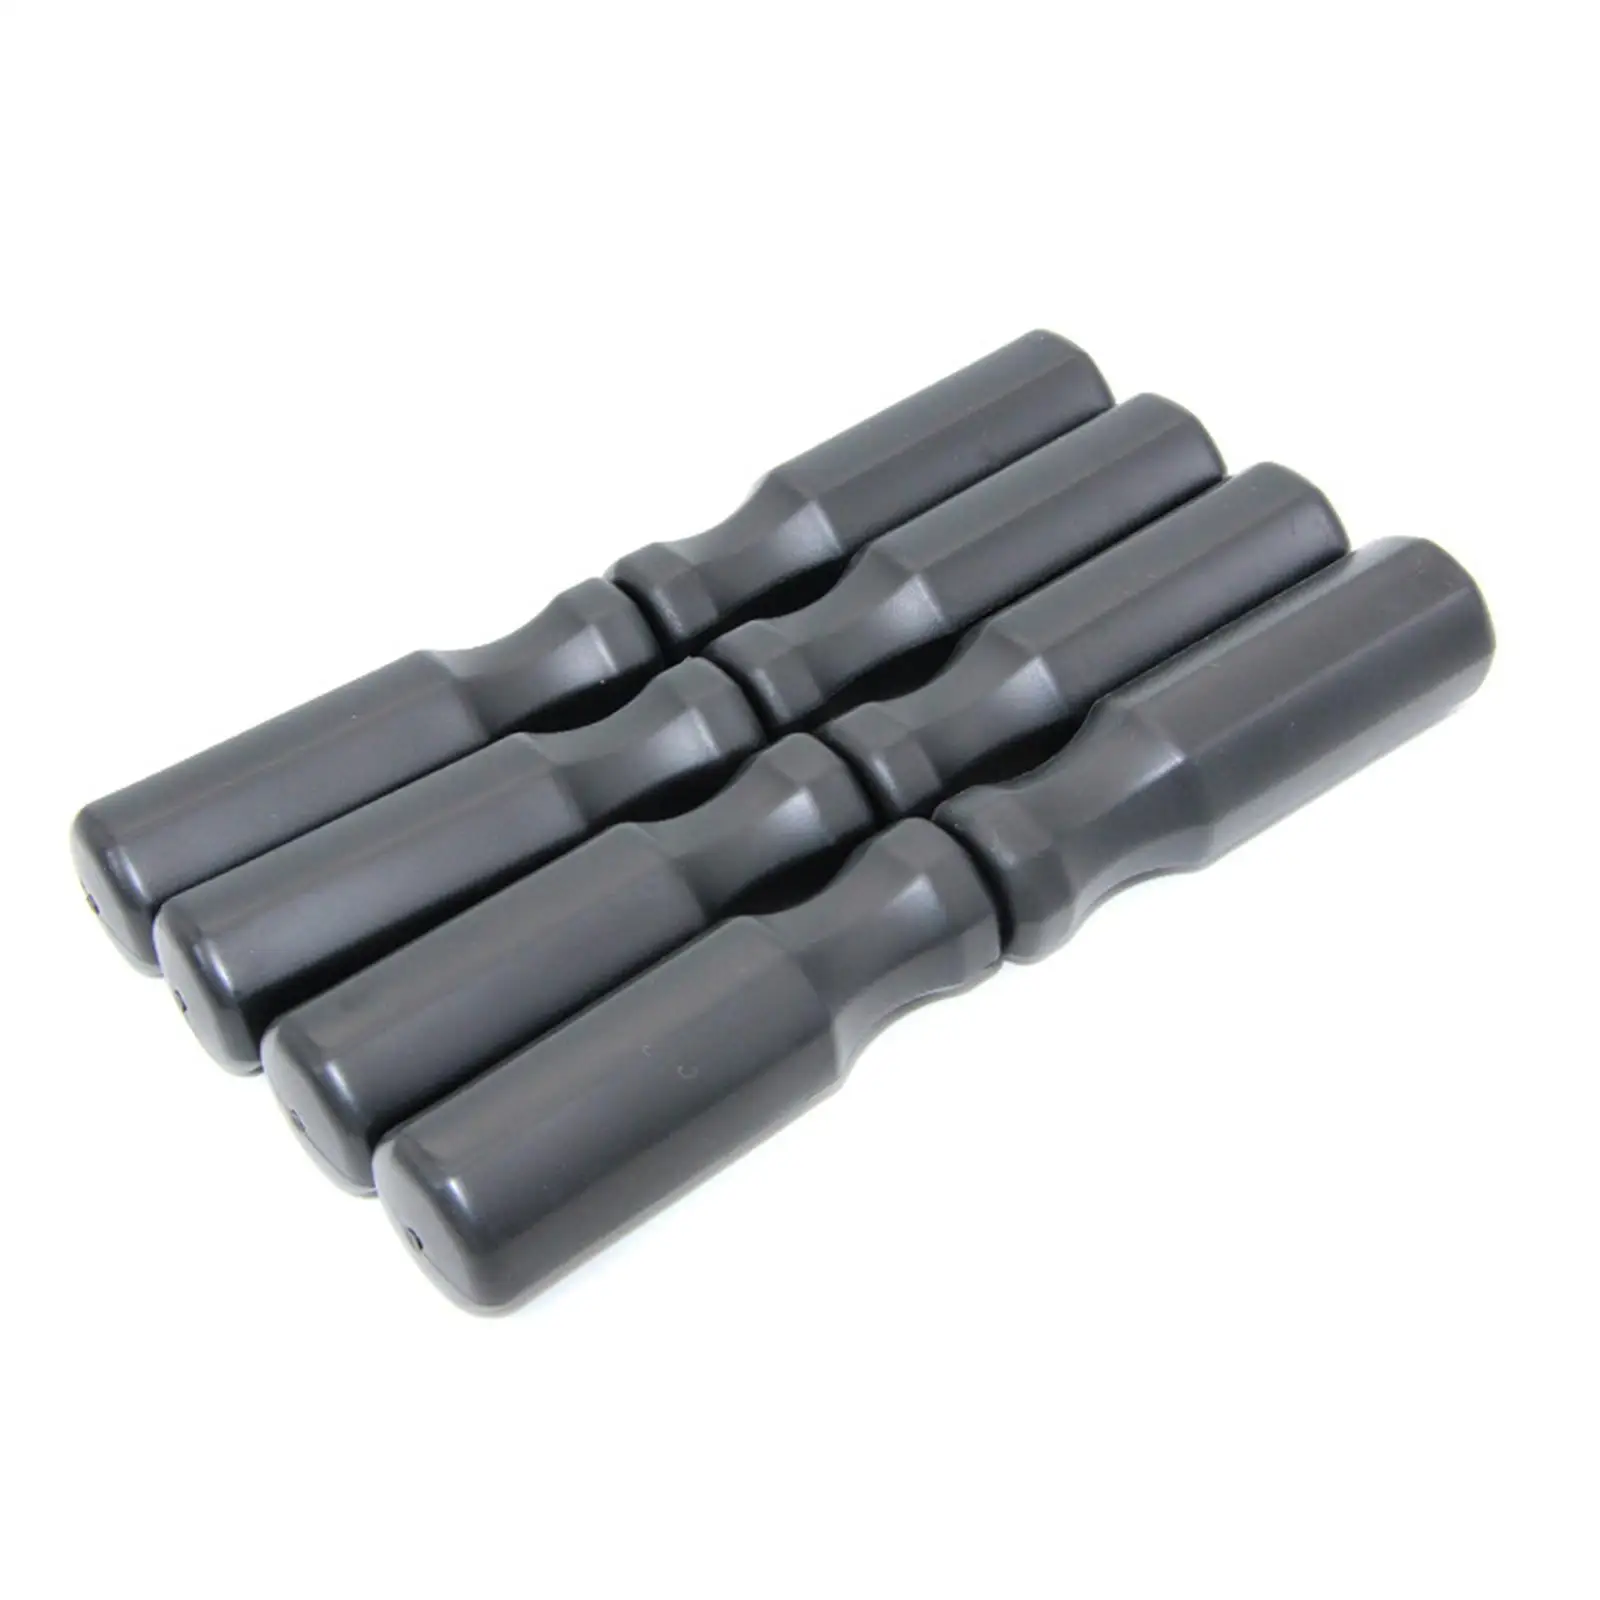 8 Pieces Foosball Handle Grip Non Slip Replacement Handles for Child Standard Foosball Tables Table Soccer Foosball Accessories